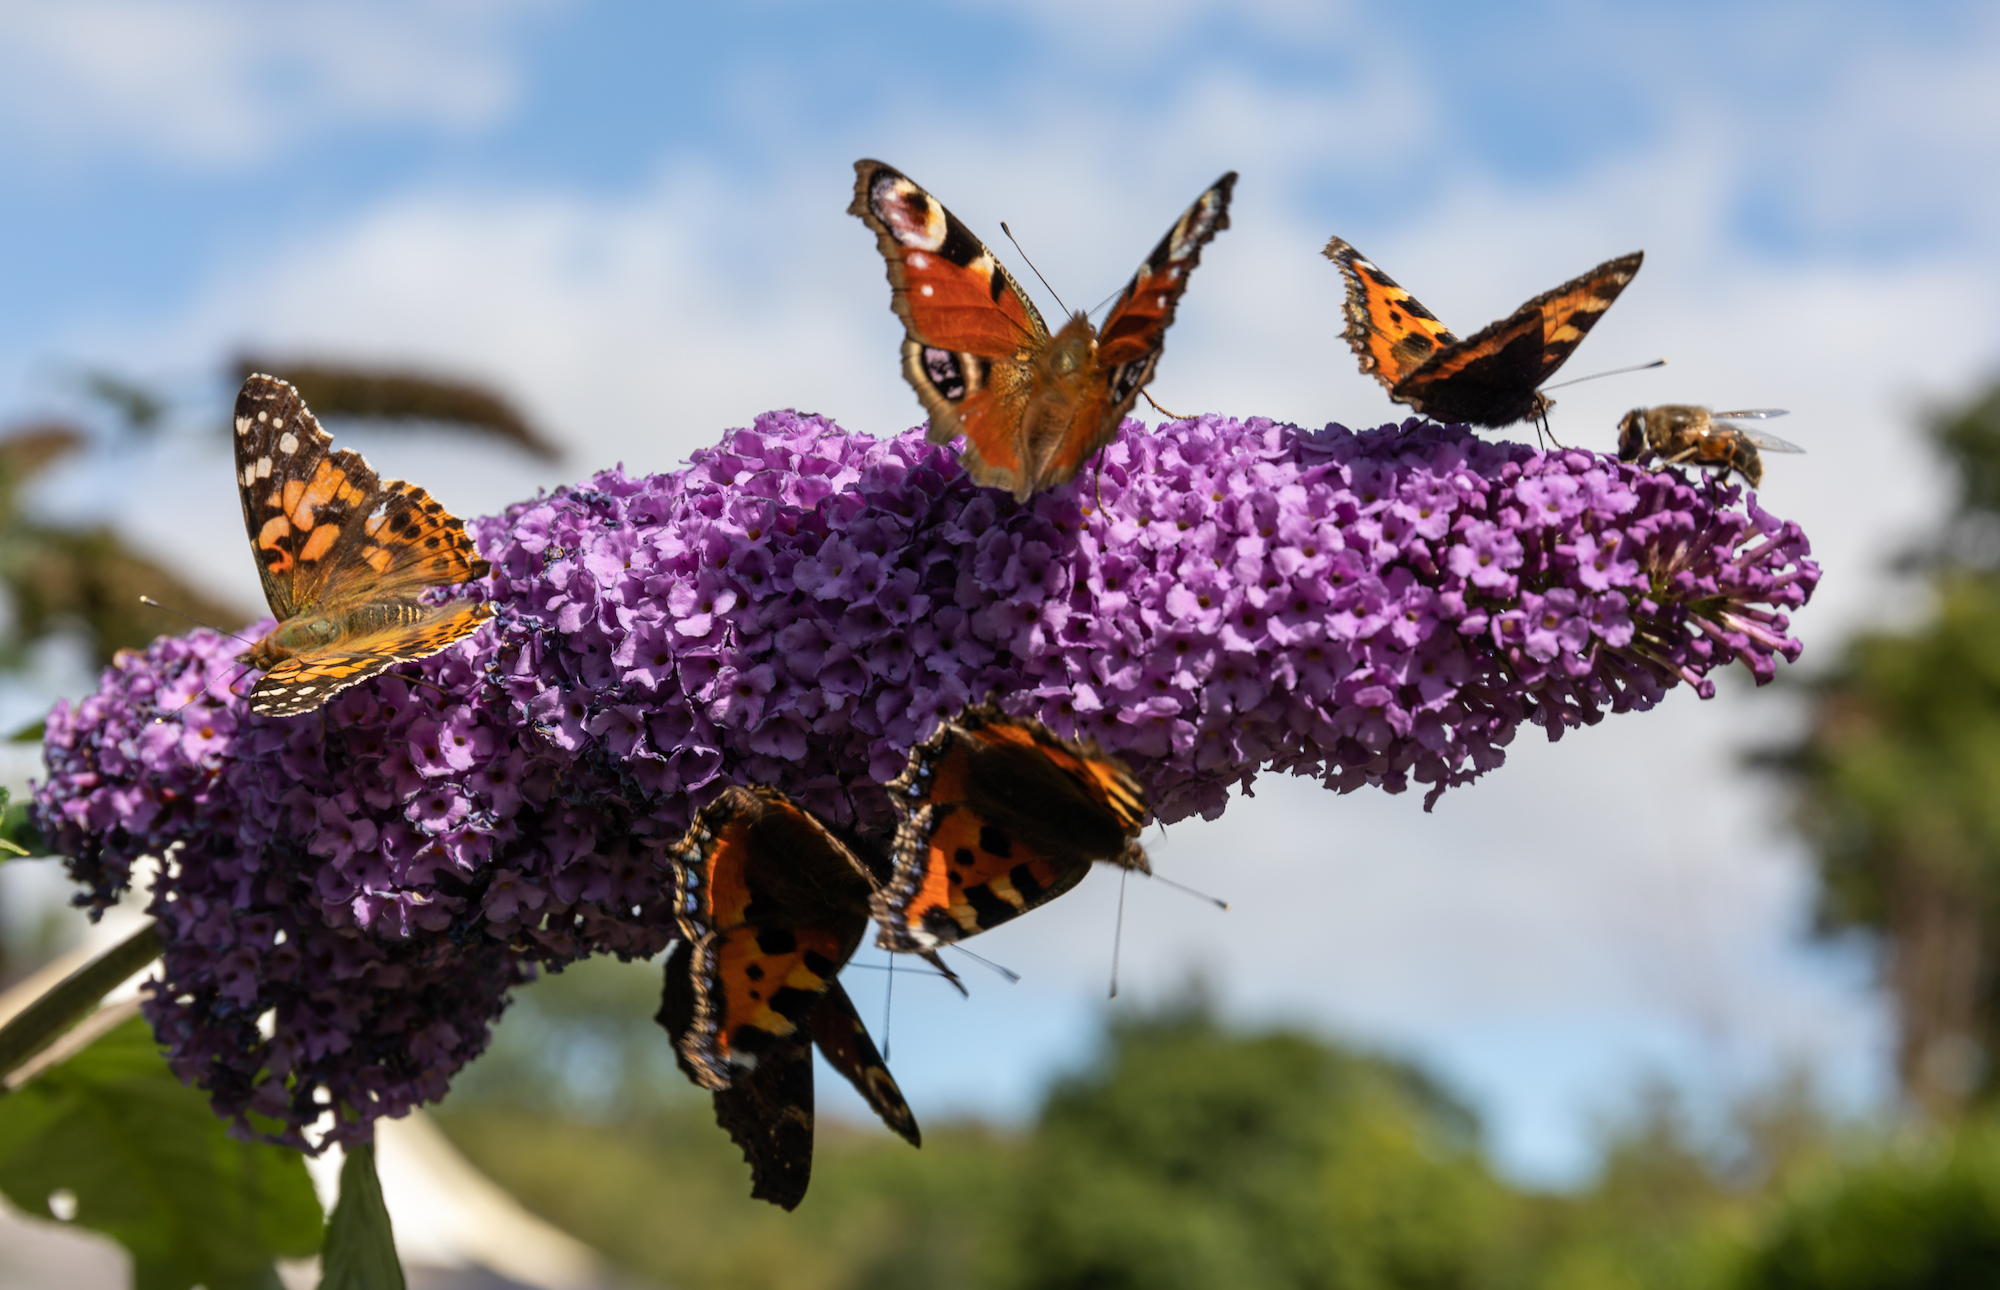 buddleia or a butterfly bush with butterflies on it